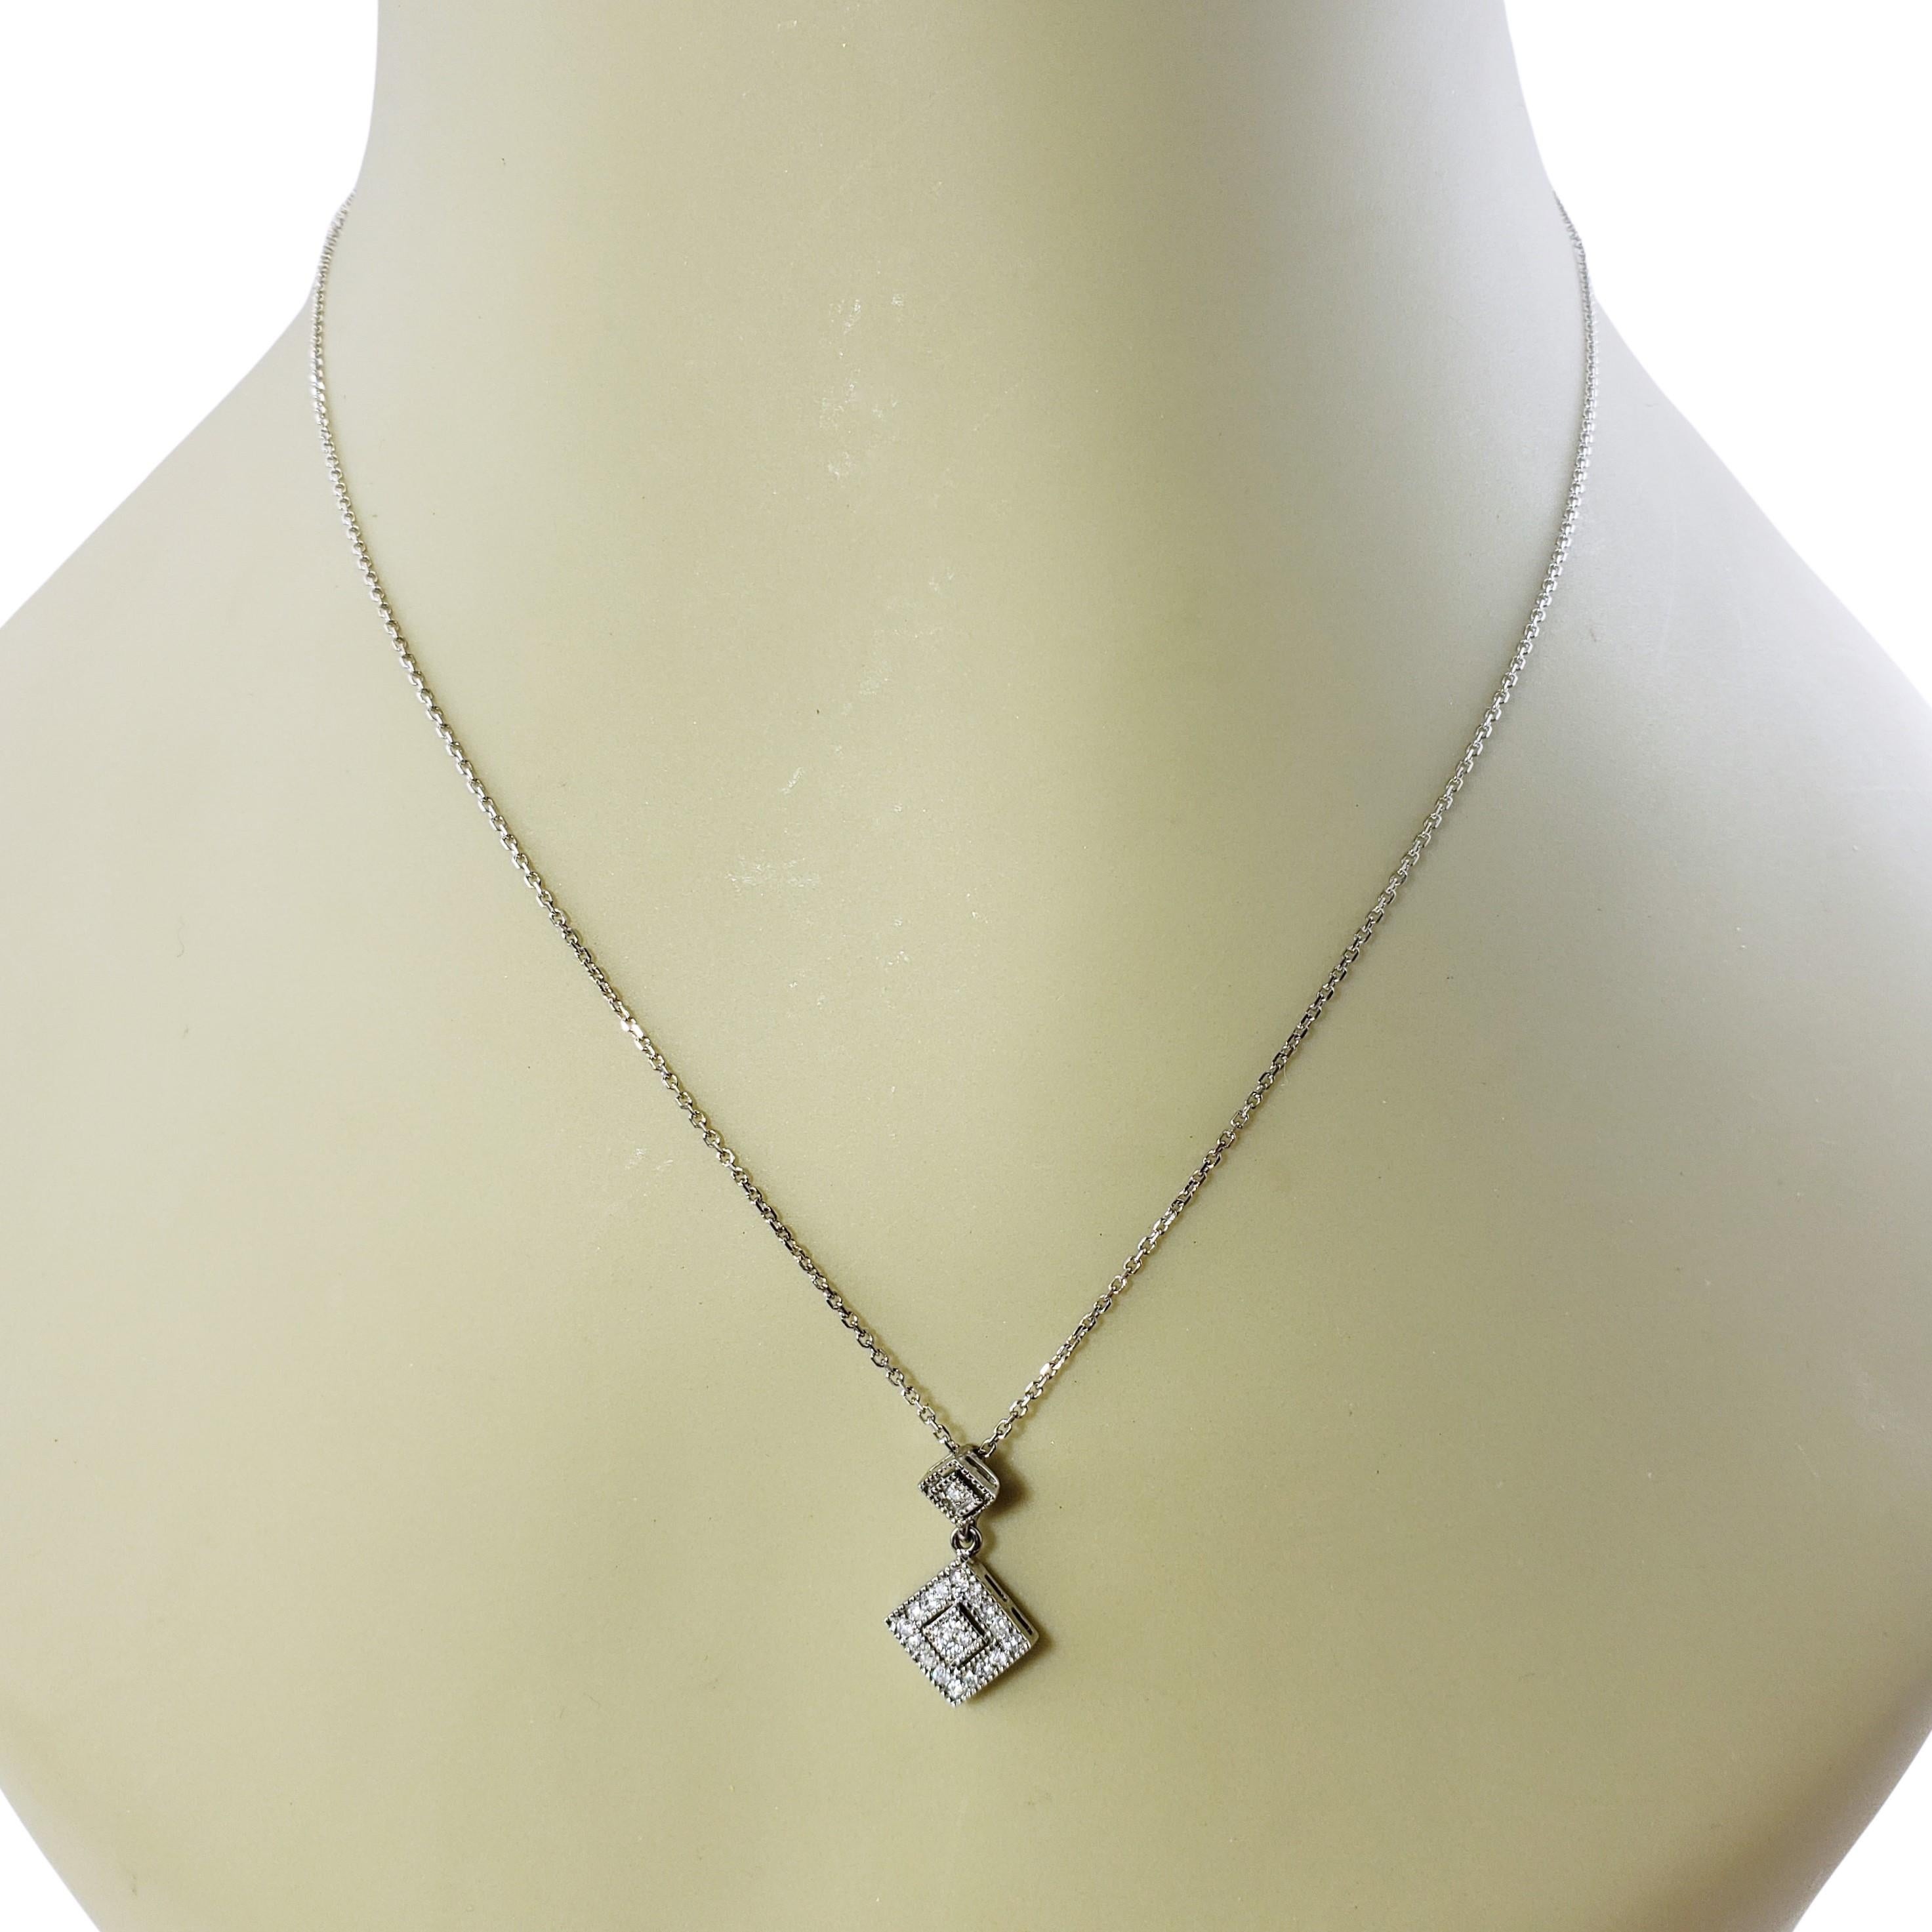 10/14 Karat White Gold and Diamond Pendant Necklace For Sale 2